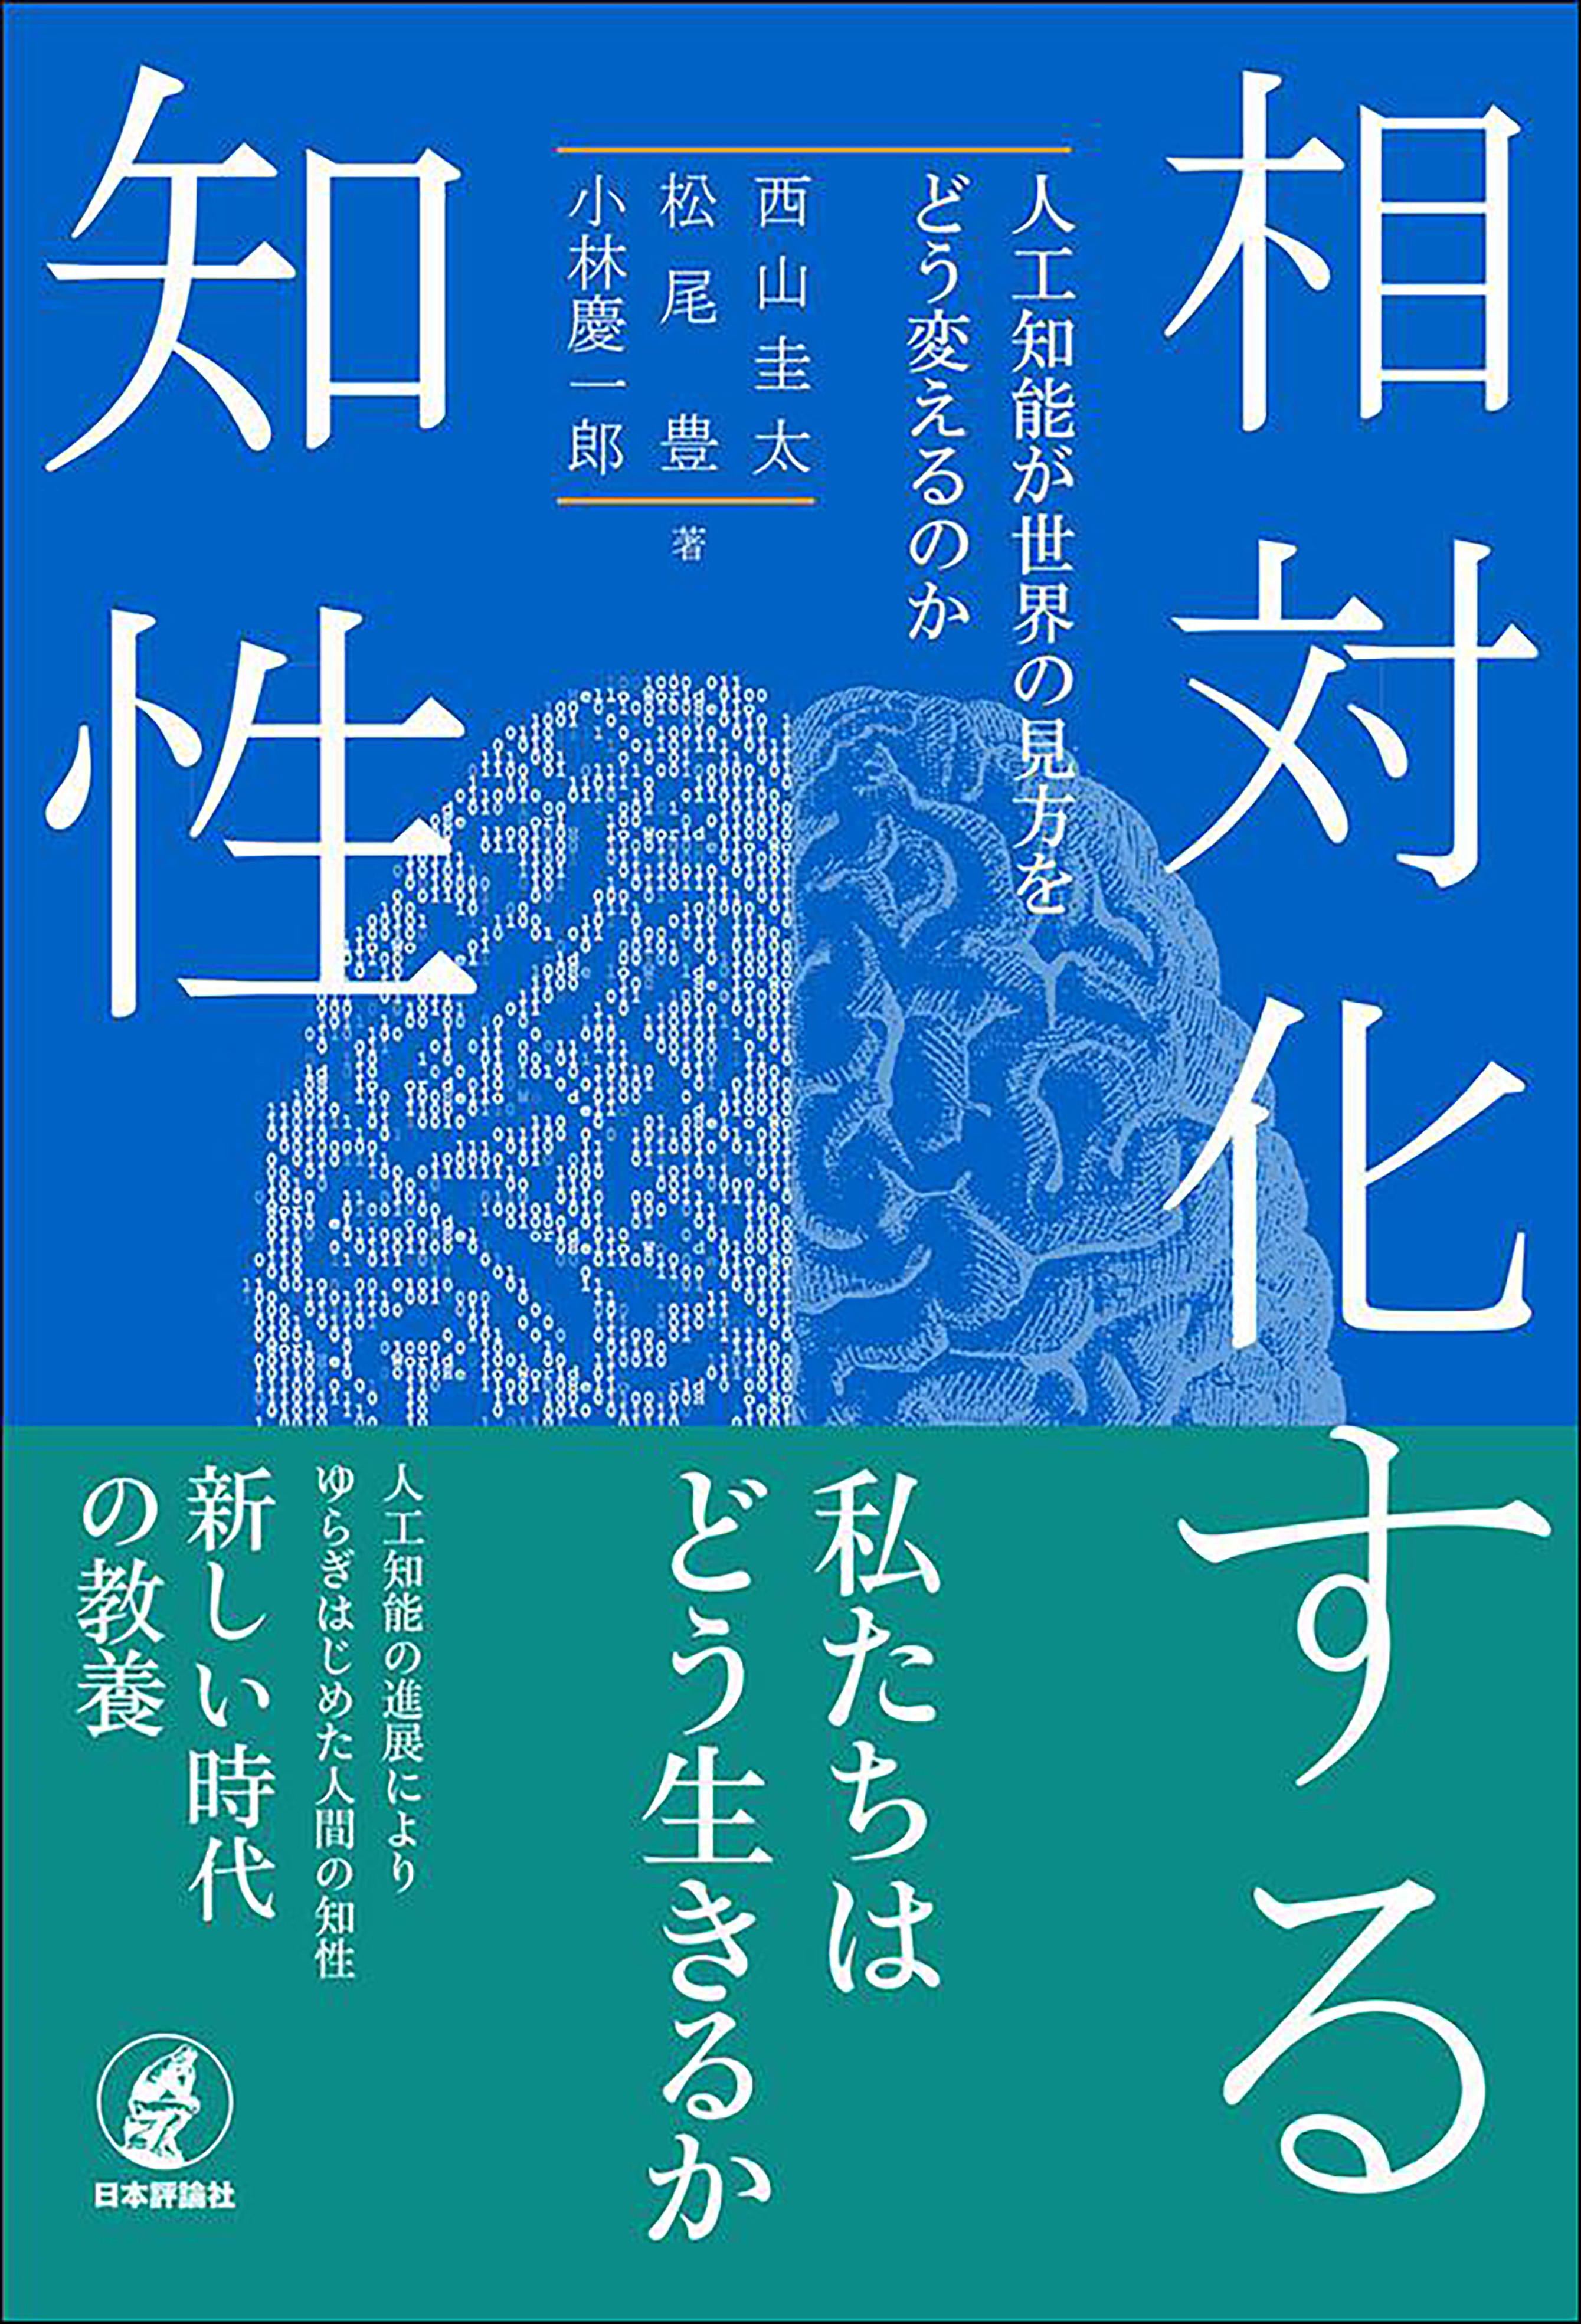 An illustration of brain on a blue cover